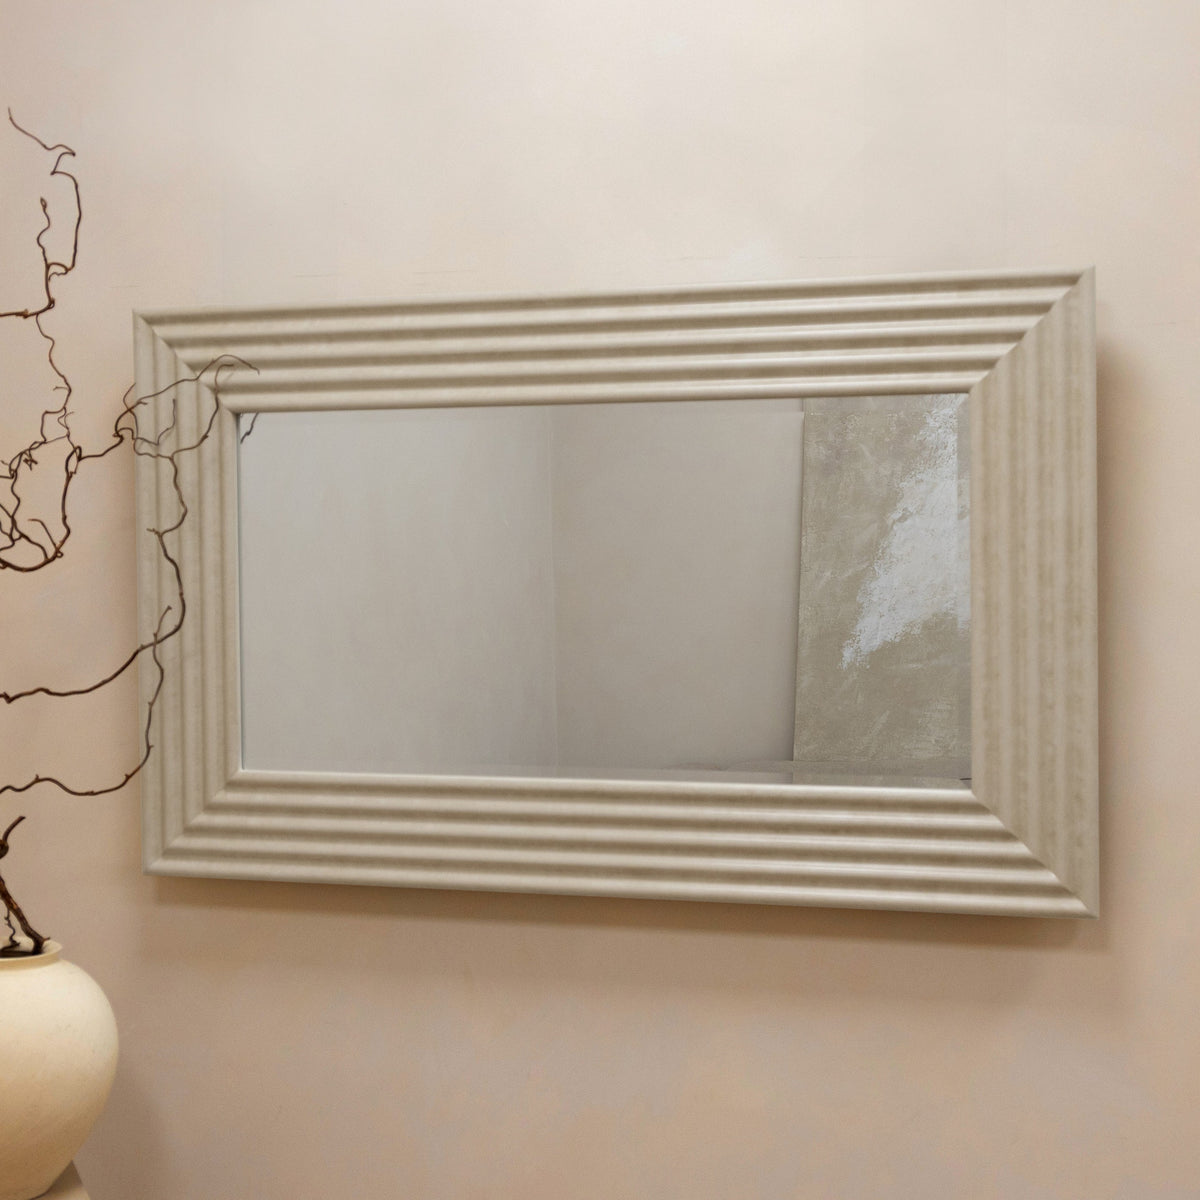 Large ribbed concrete console mirror displayed on wall